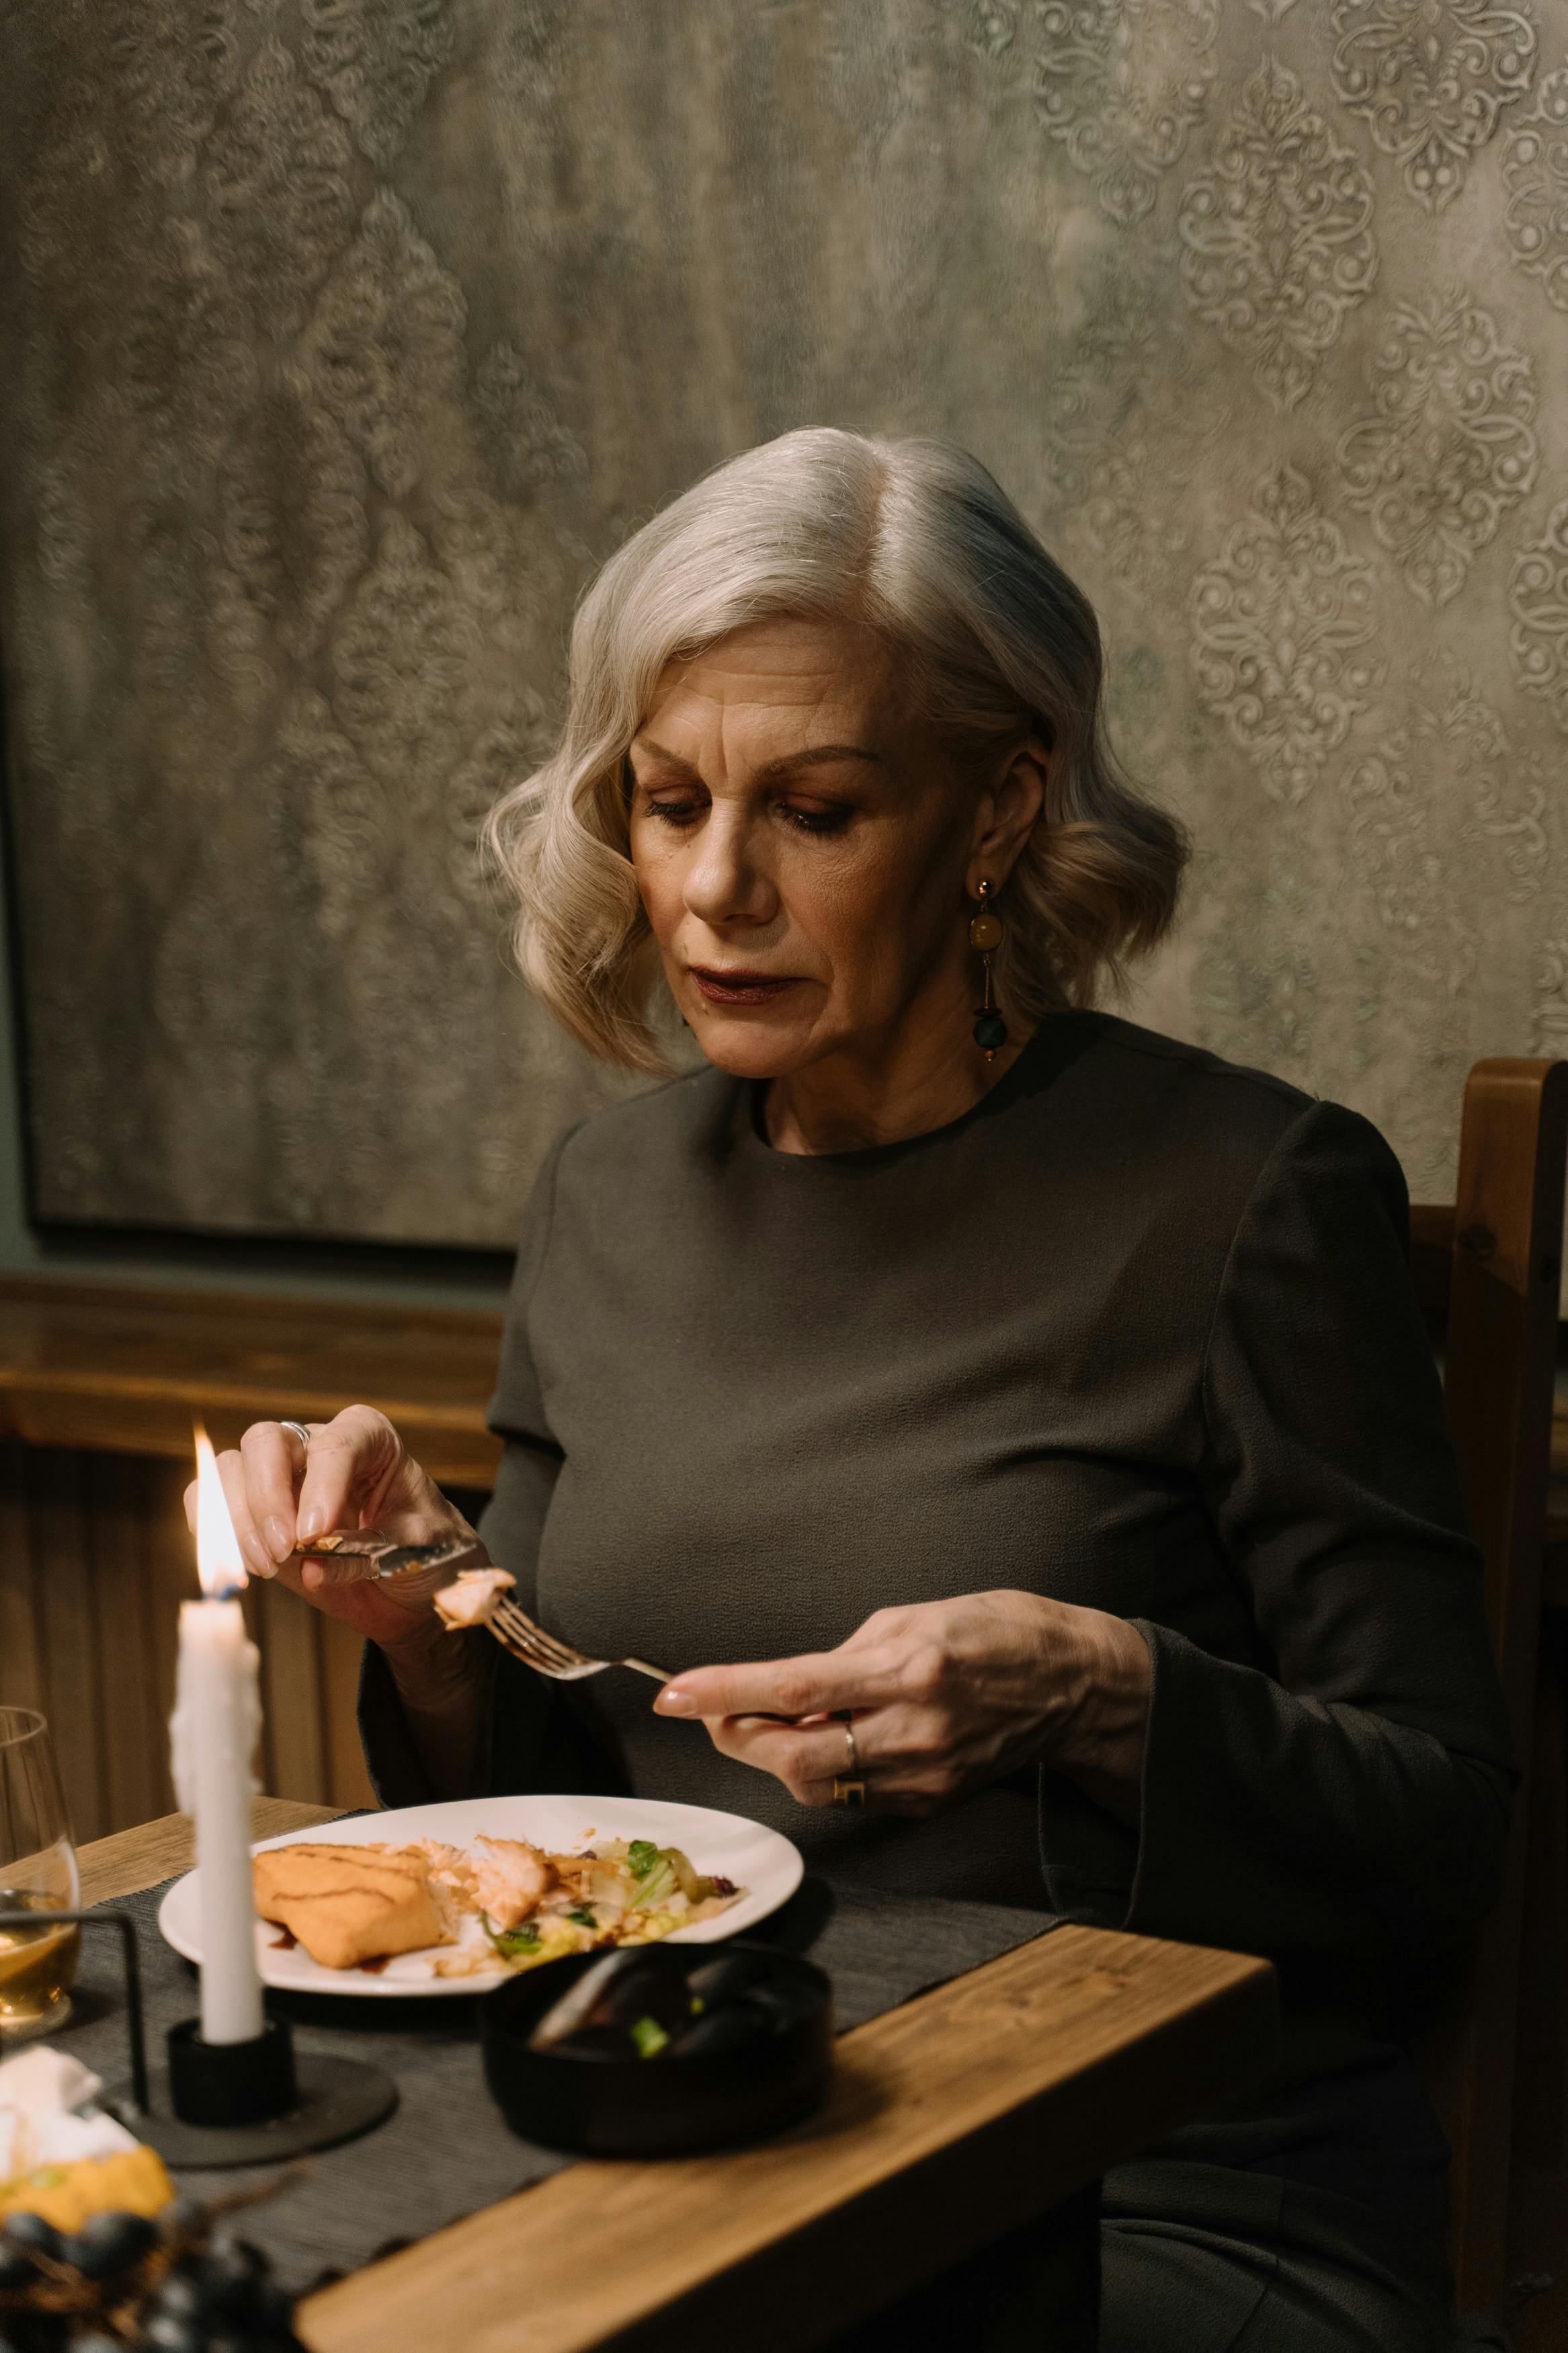 An elderly woman busy eating | Source: Pexels